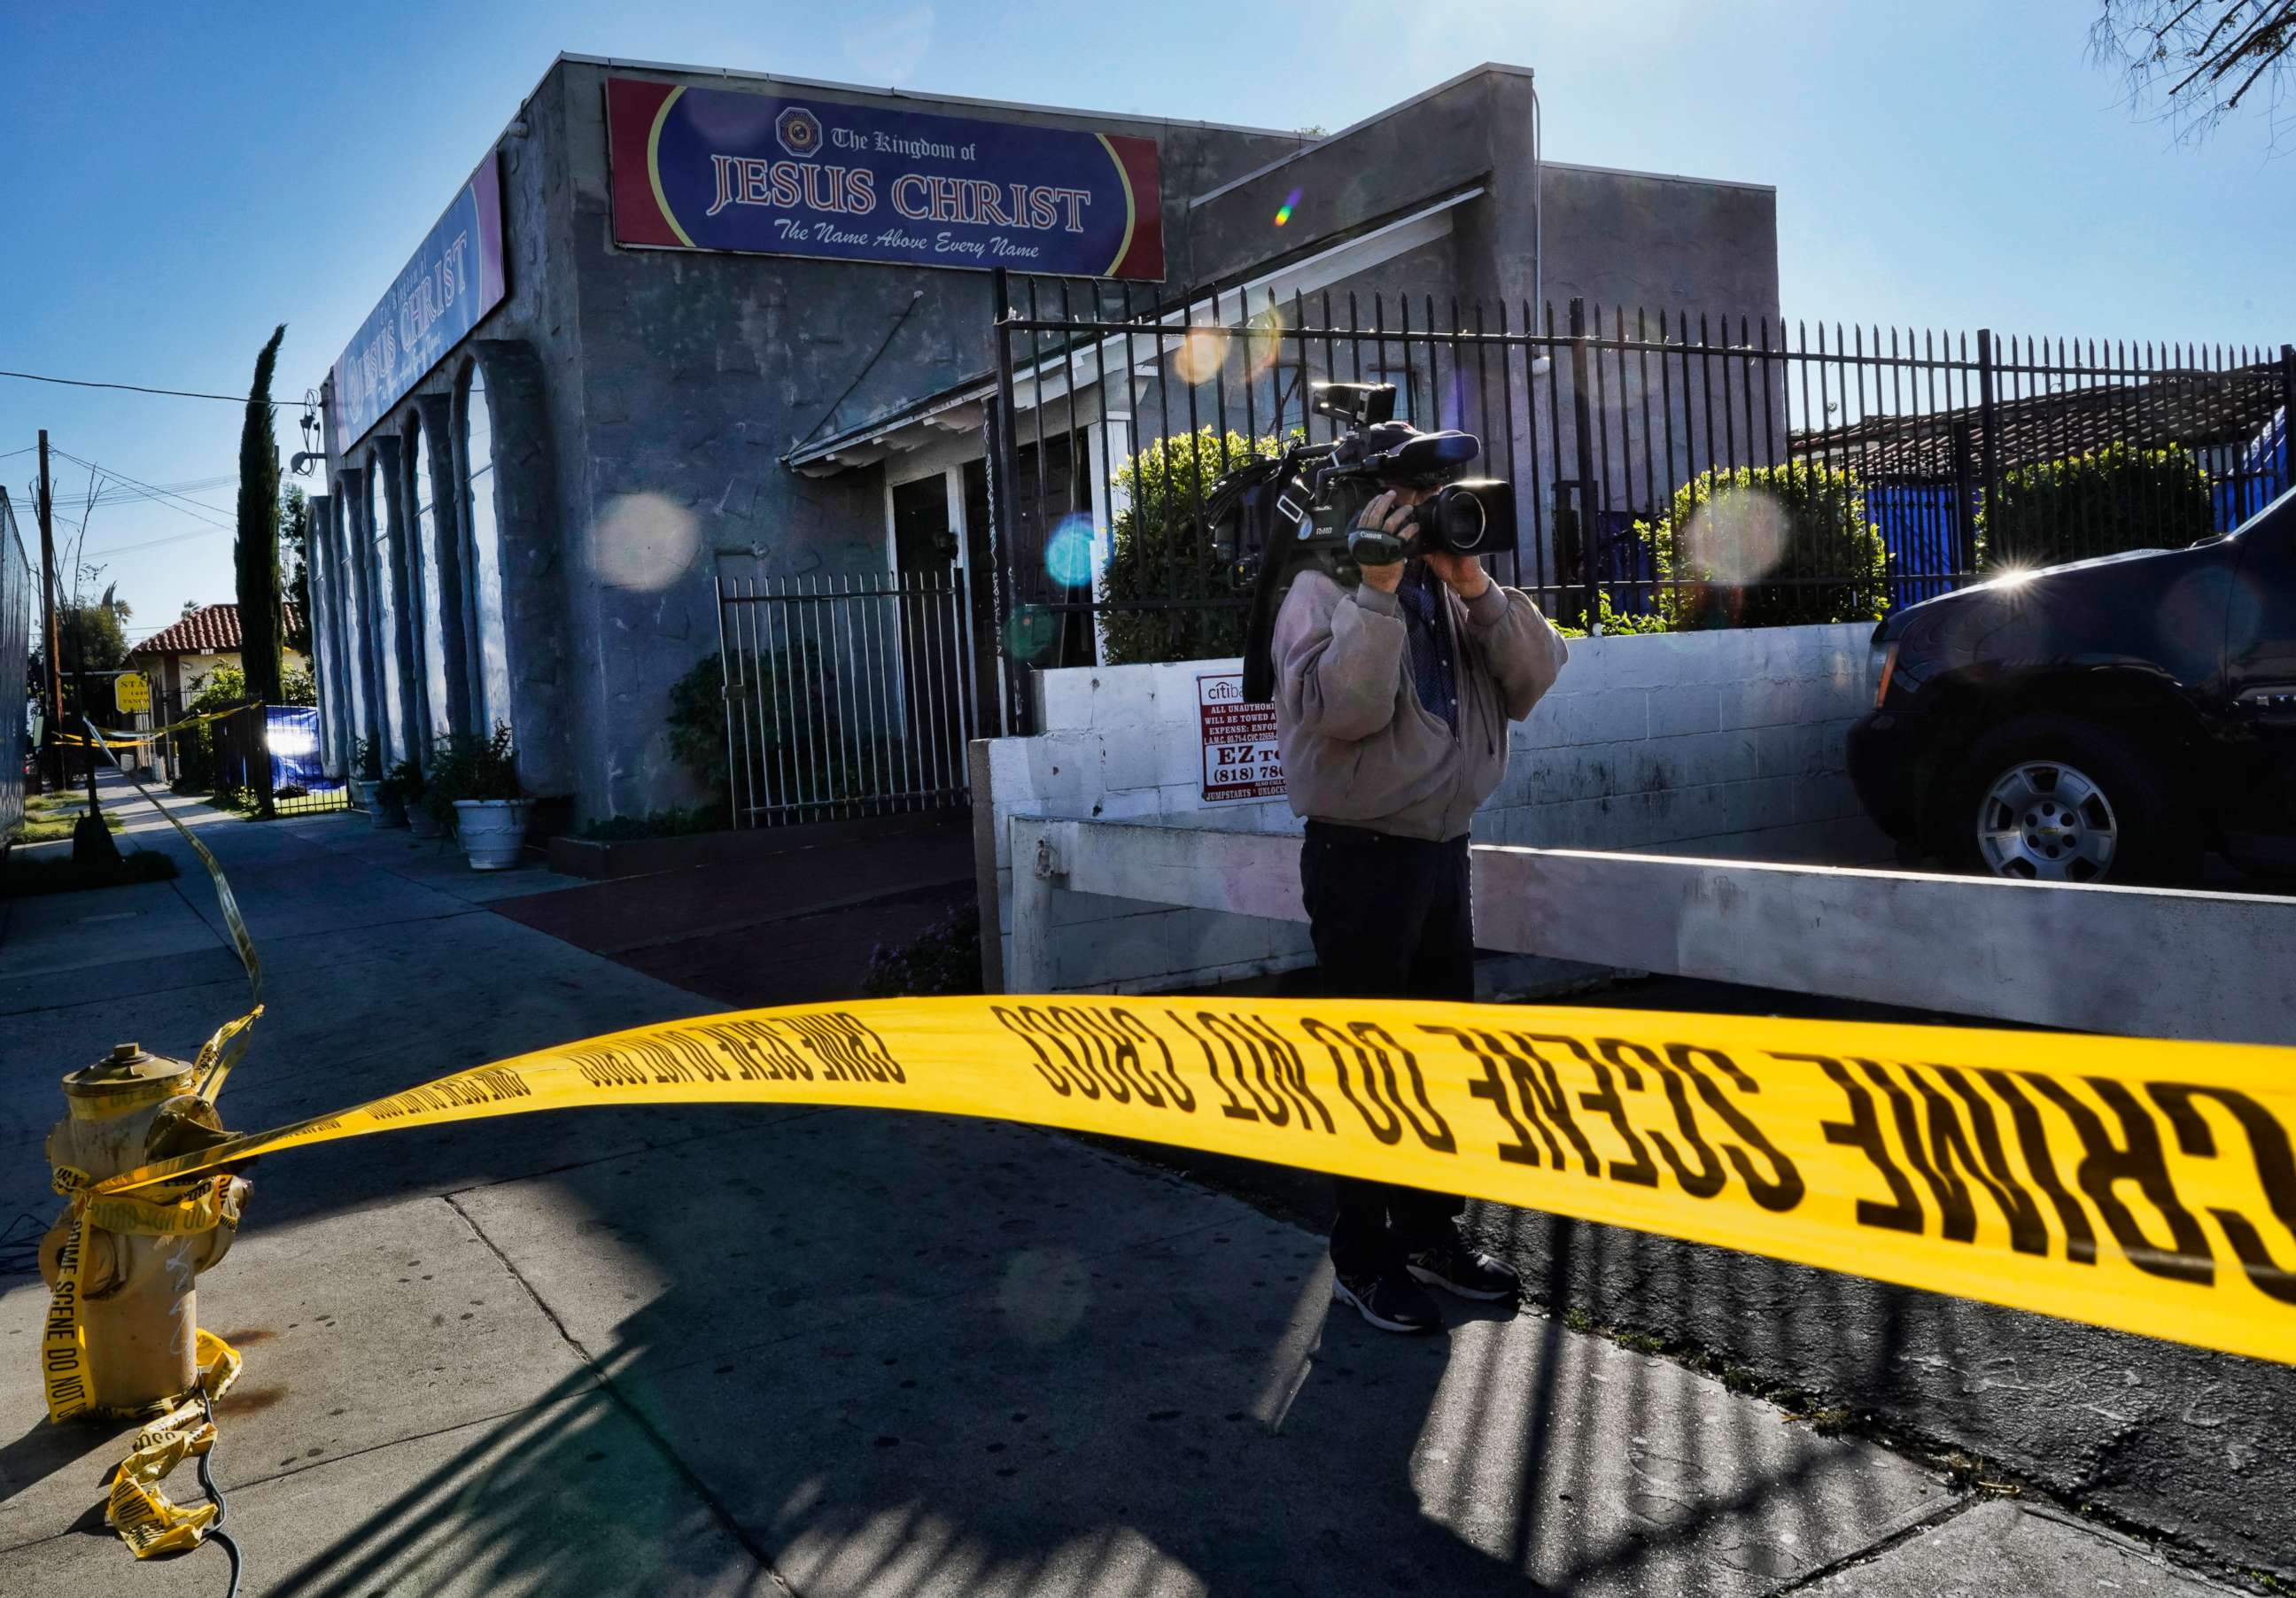 PHOTO: Crime scene tape is seen closing off an area around the grounds of the Kingdom of Jesus Christ Church in the Van Nuys section of Los Angeles, Jan. 29, 2020.